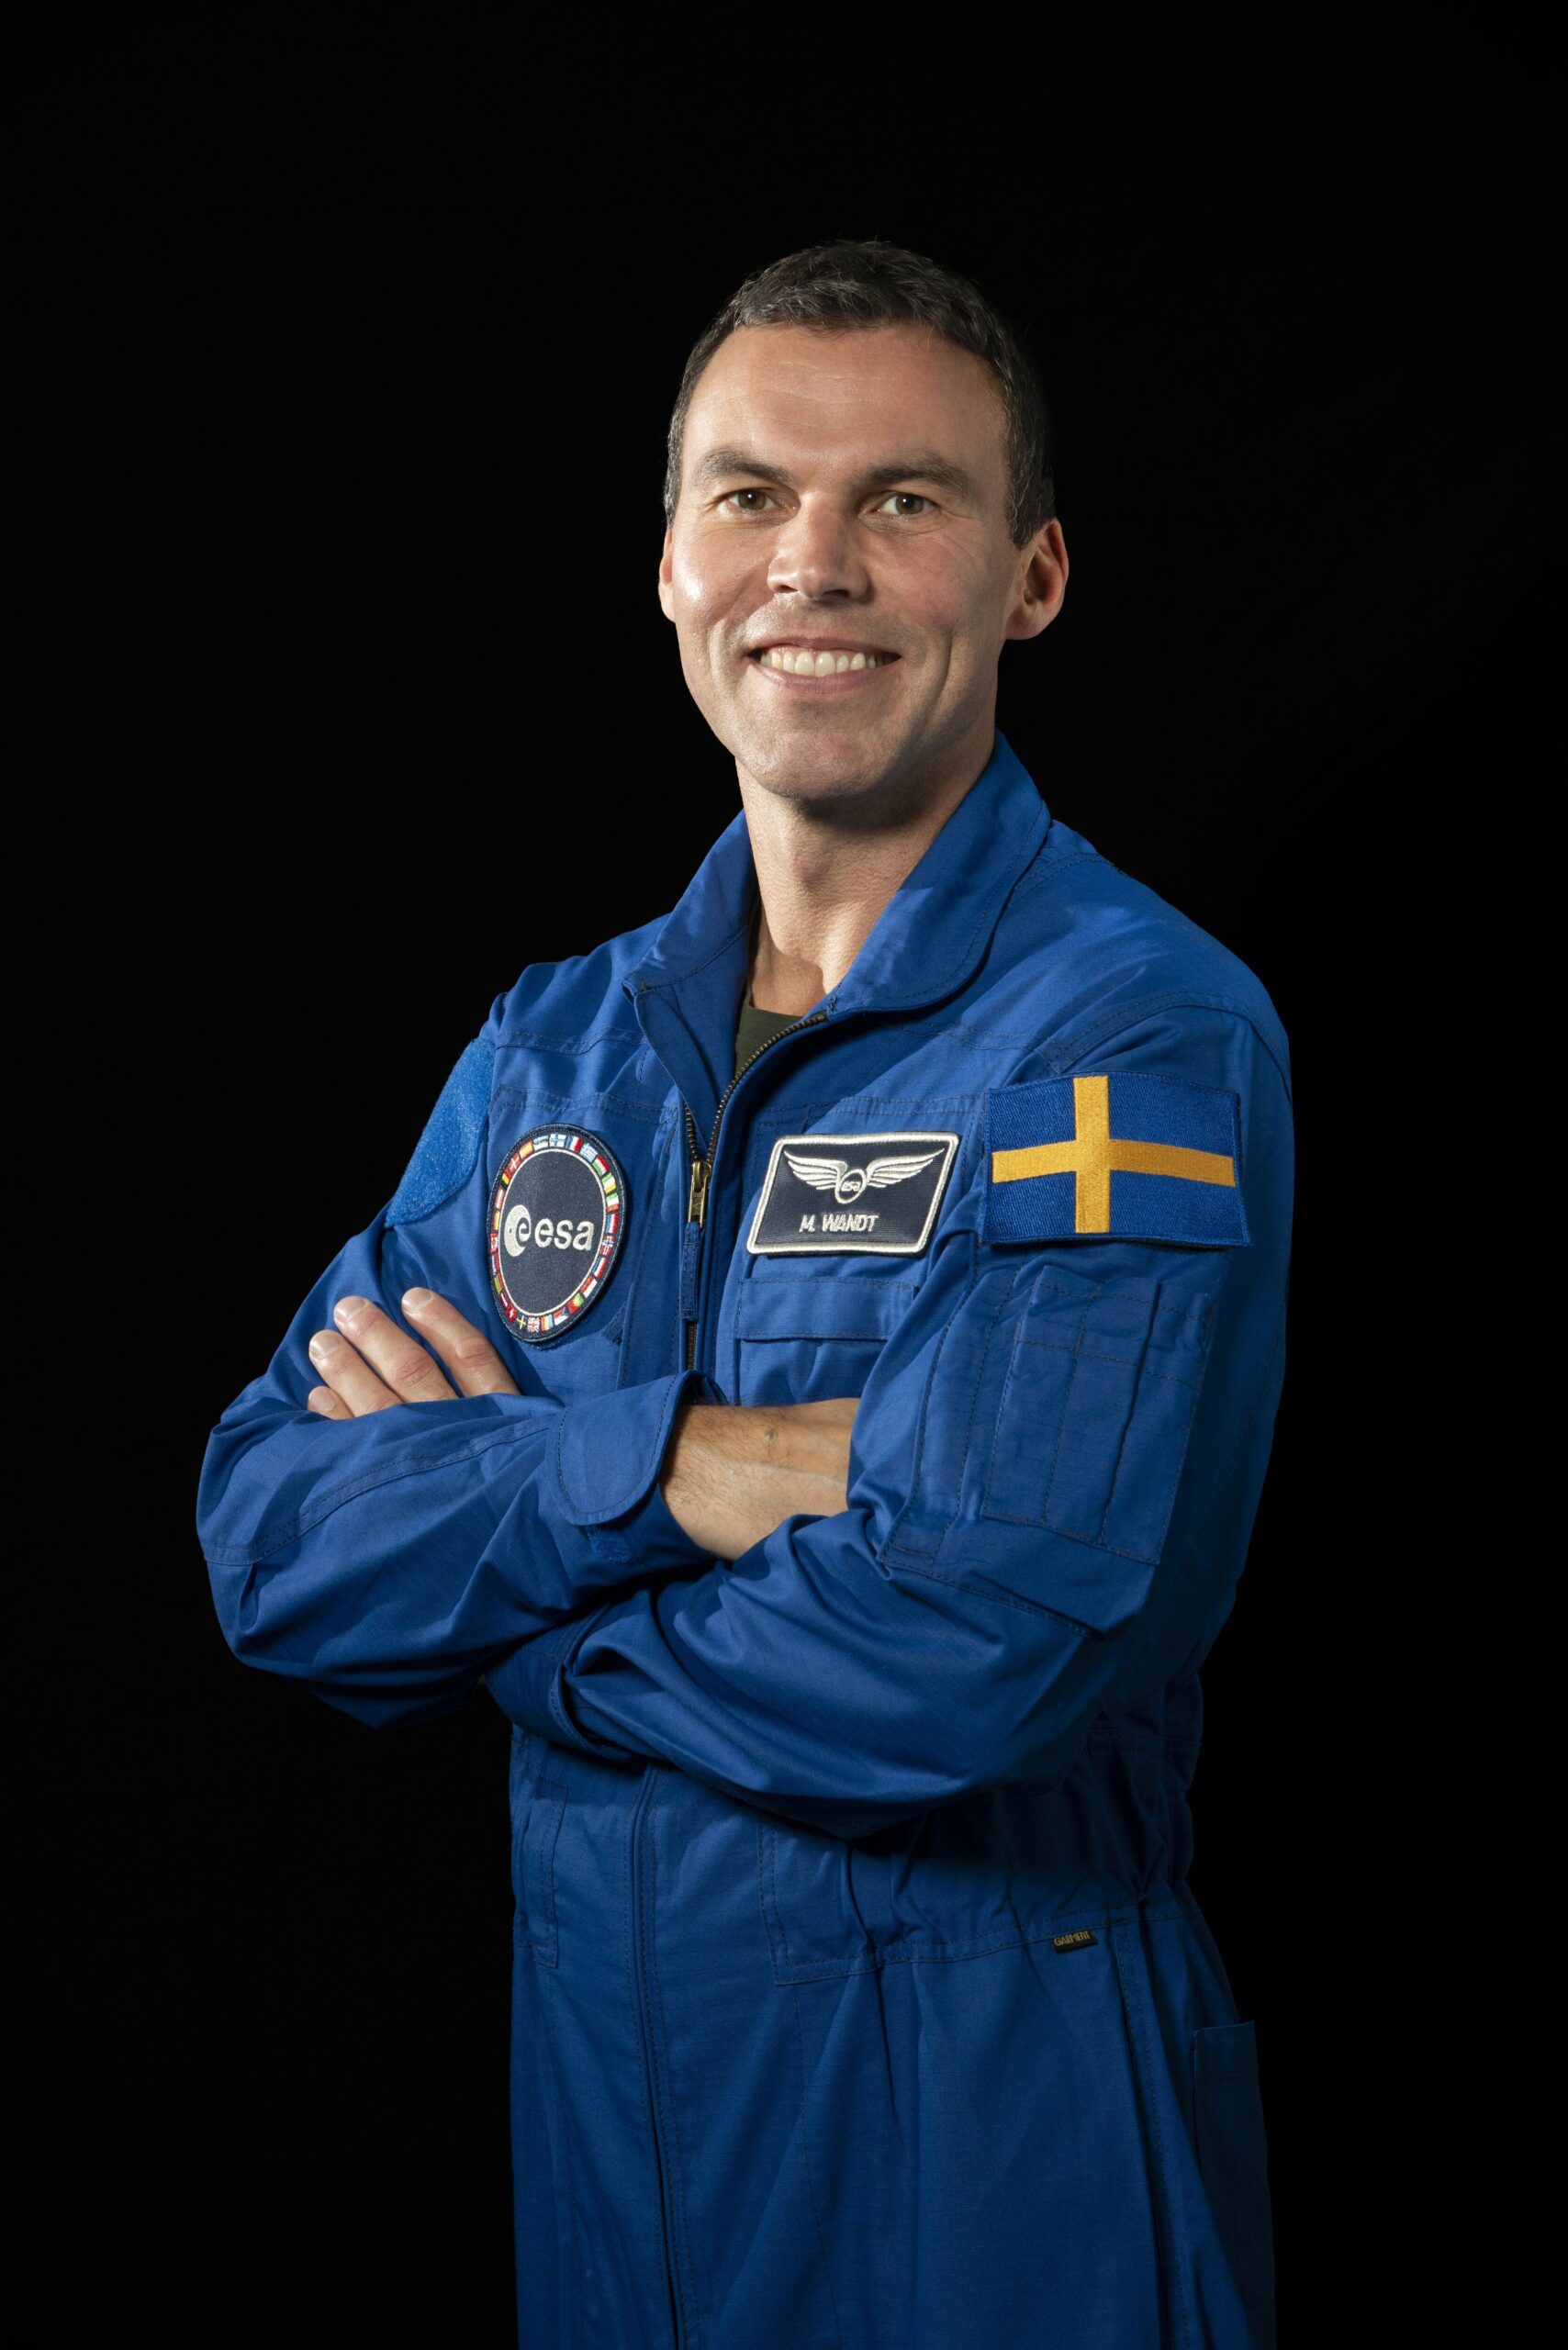 Marcus Wandt in a blue uniform with the Swedish flag on his arm.